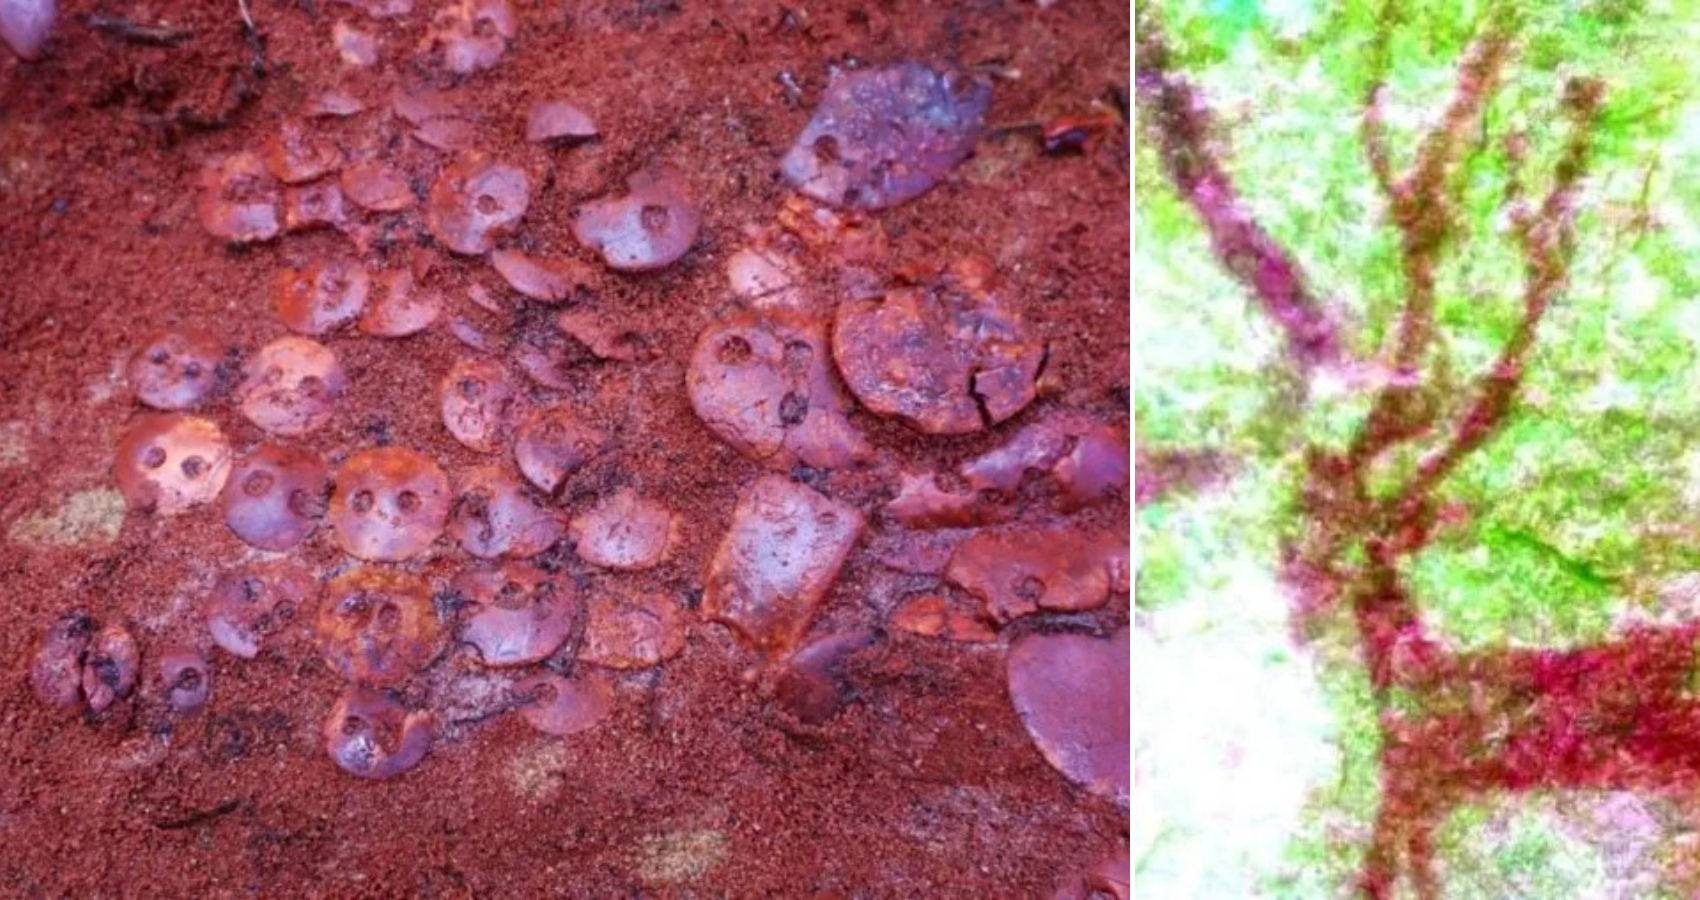 10,000-year-old rock art discovered in the Indian village of Medikonda